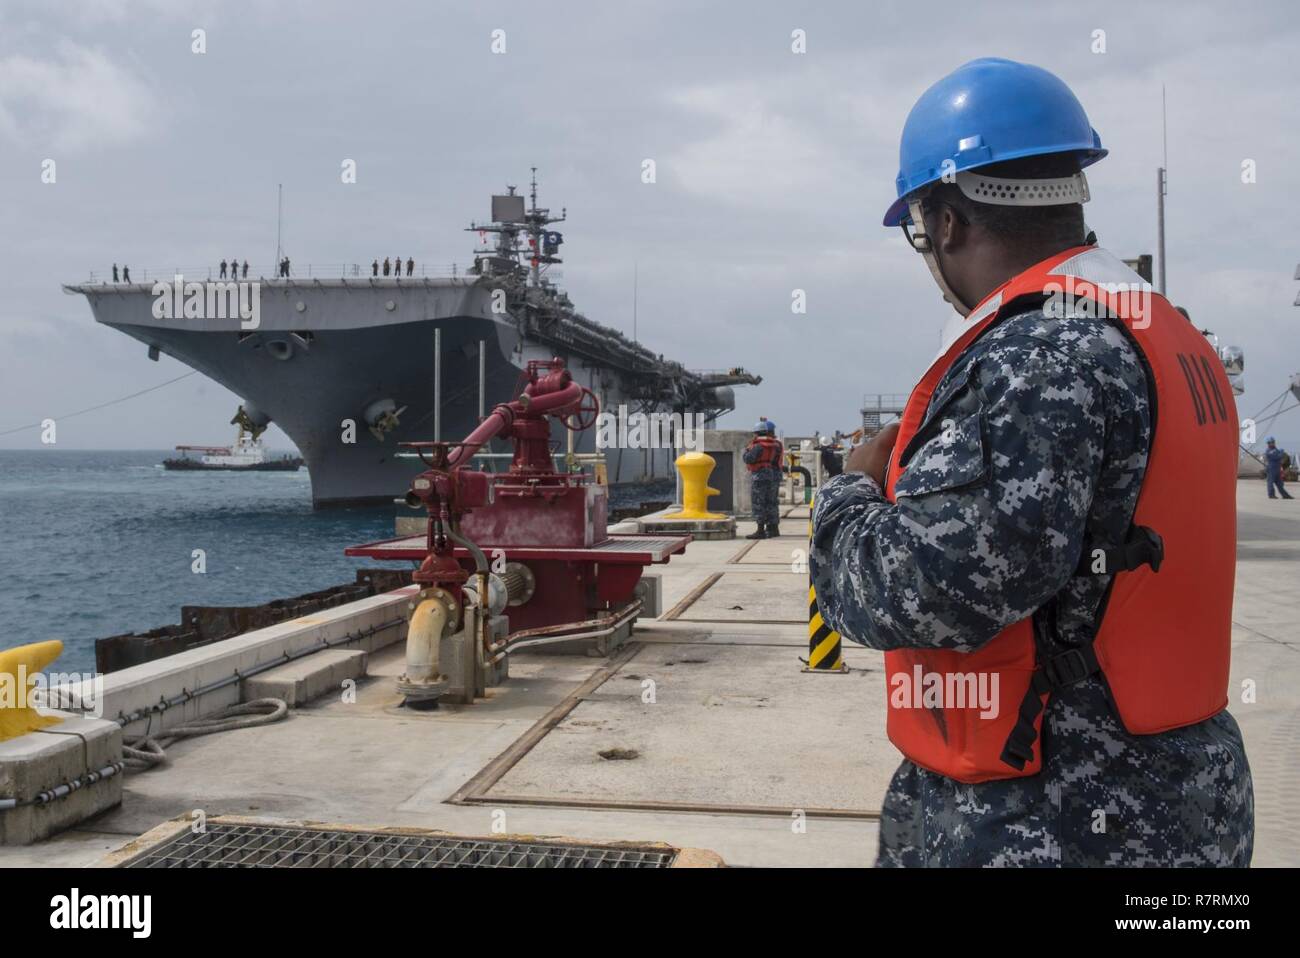 OKINAWA, Japan (April 6, 2017) Machinist’s Mate 3rd Class Gary Benson, from Athens, Ga., assigned to Commander, Fleet Activities Okinawa (CFAO) port operations, performs line handling duties as the amphibious assault ship USS Bonhomme Richard (LHD 6) arrives pierside at White Beach Naval Facility to disembark Marines of the 31st Marine Expeditionary Unit. Bonhomme Richard, flagship of the Bonhomme Richard Amphibious Ready Group, is on a patrol, operating in the Indo-Asia-Pacific region to enhance warfighting readiness and posture forward as a ready-response force for any type of contingency. Stock Photo